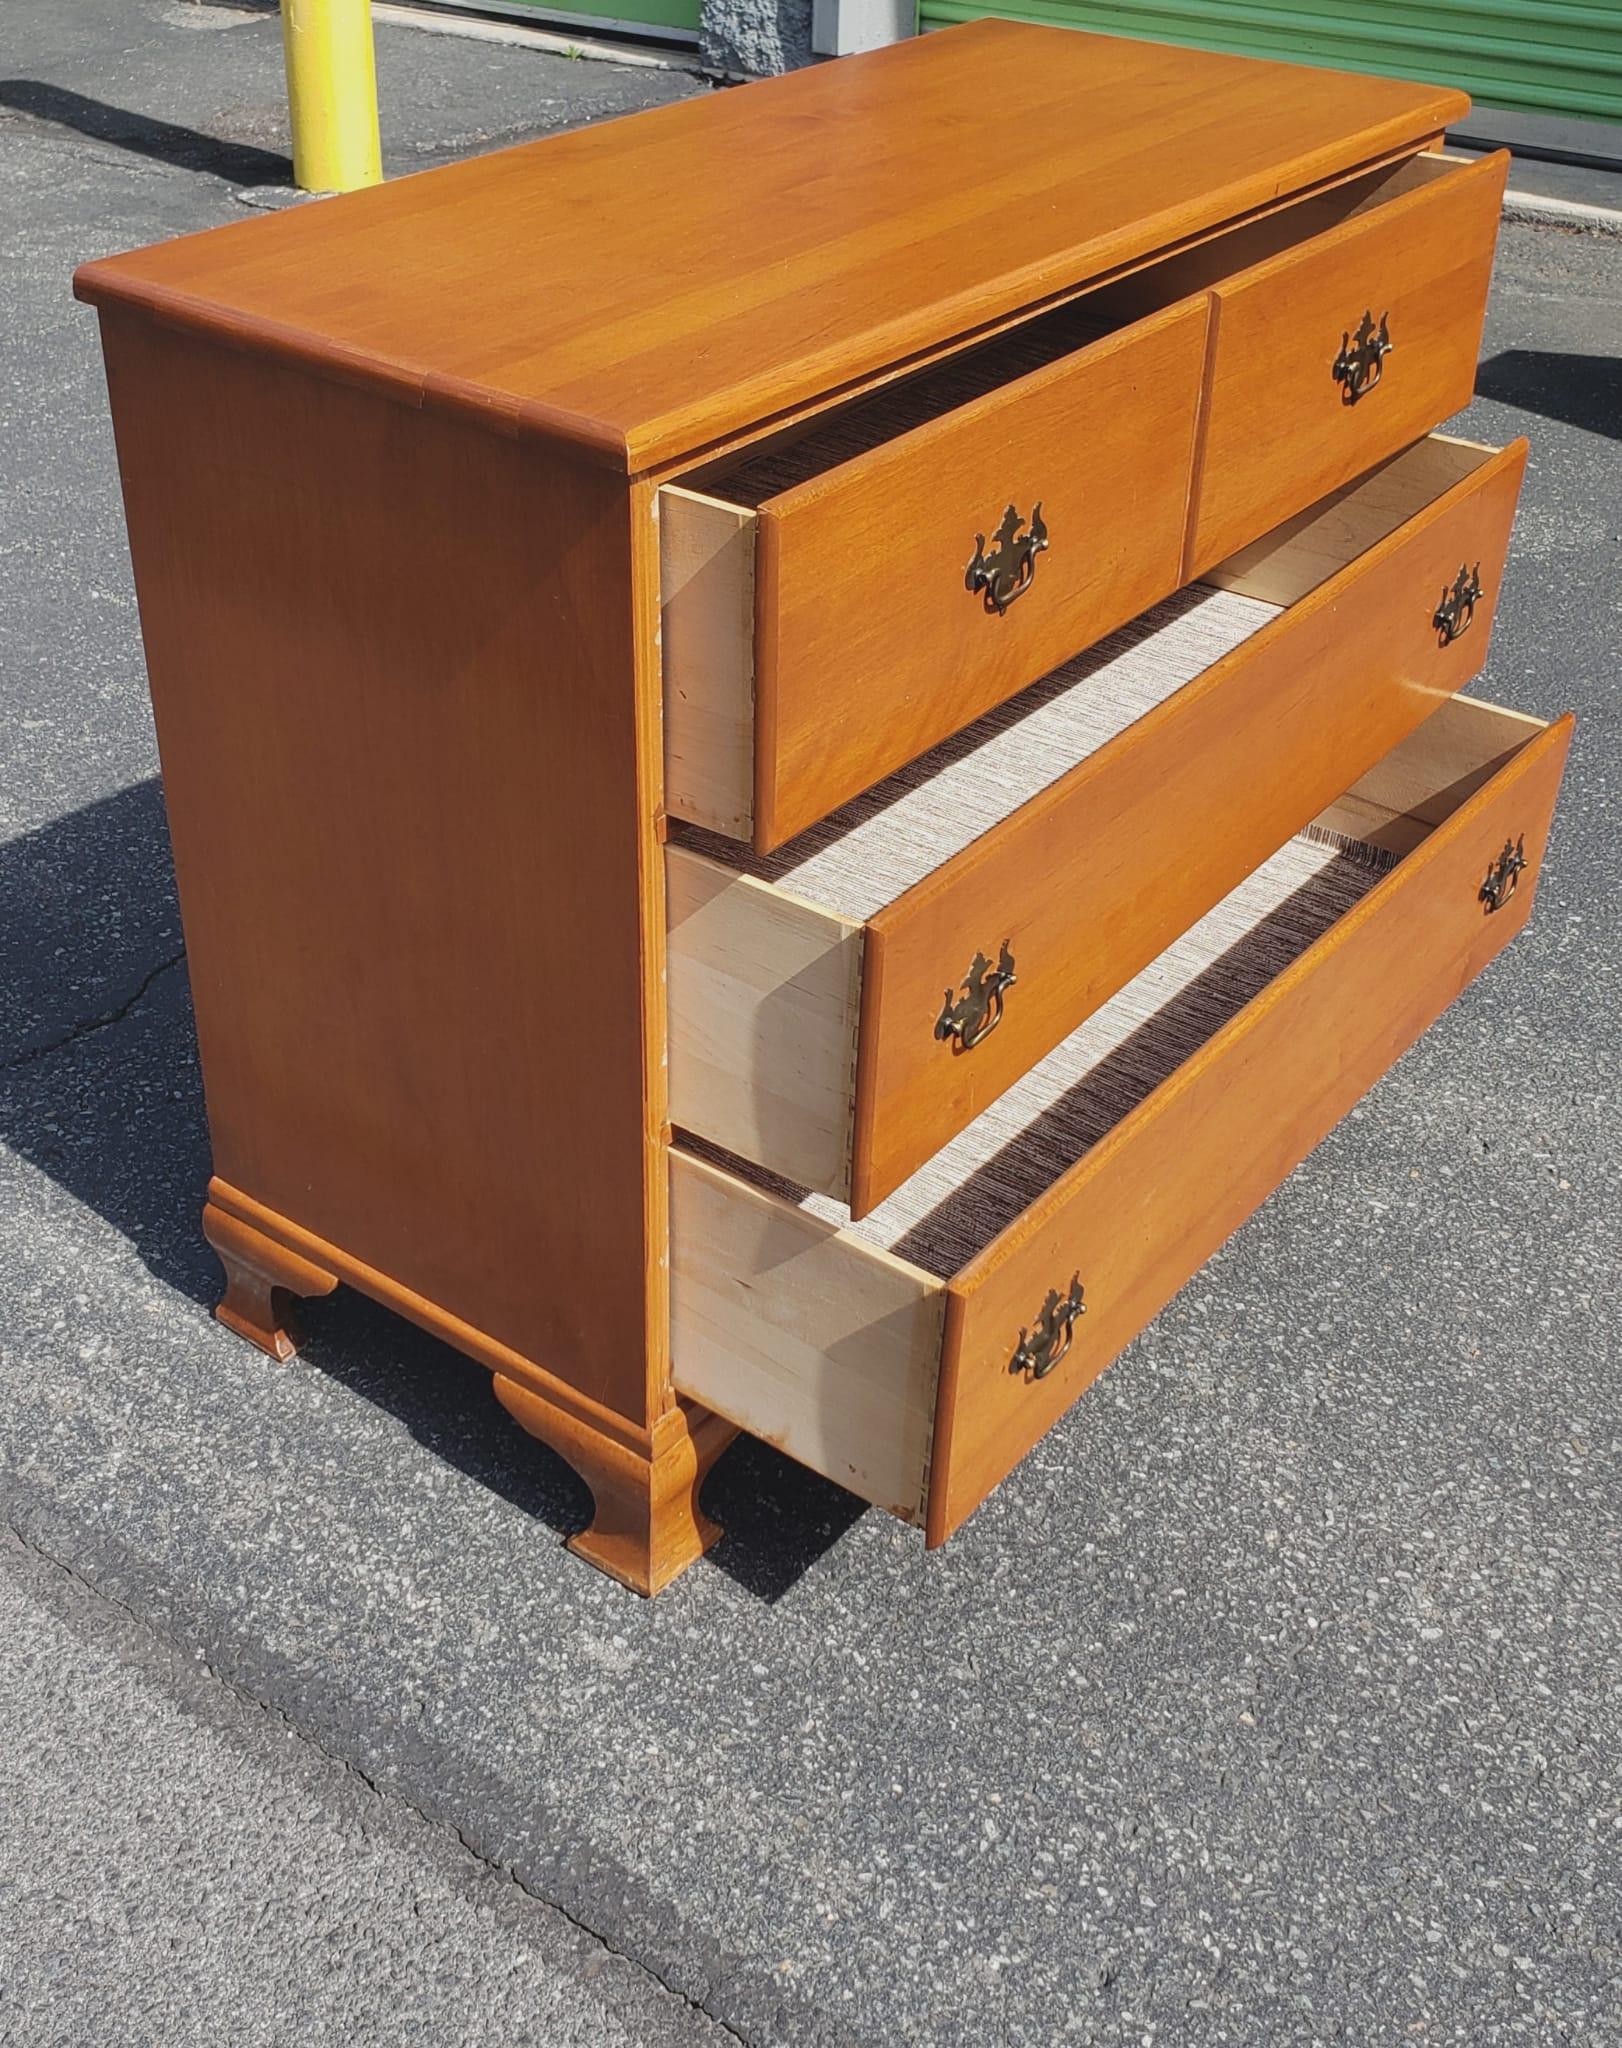 Contemporary AE Coburn Manufacturing Chippendale Maple three drawer Chest of Drawers in good vintage condition. Measures 40